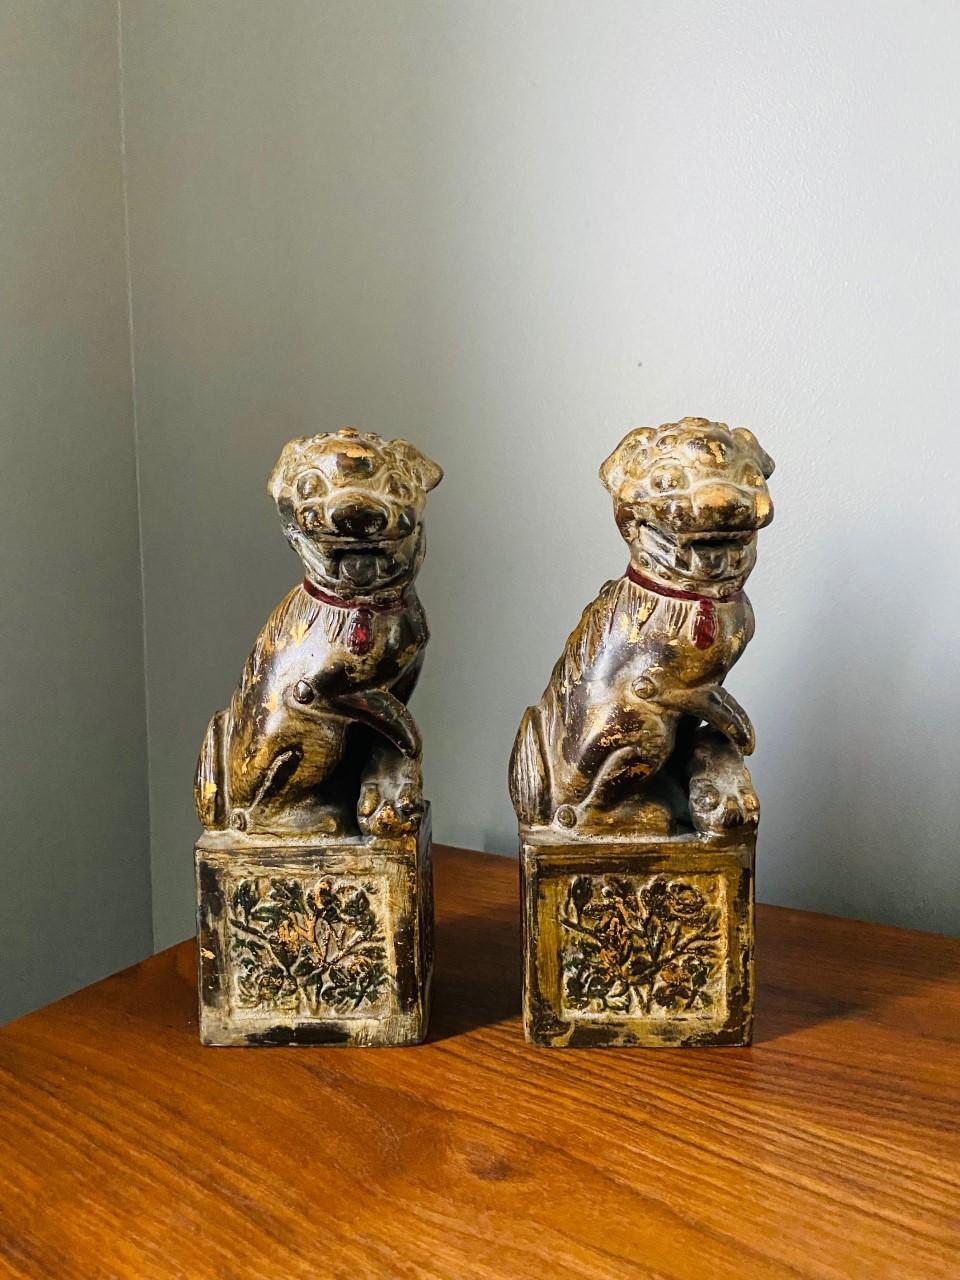 Incredibly beautiful pair of 1970s vintage bronze foo dogs by Neiman Marcus Japan. Guardian lions, also known as komainu, shishi, or foo dogs, are intimidating, mythical, lion-like creatures seen across a breath of art forms, ranging from